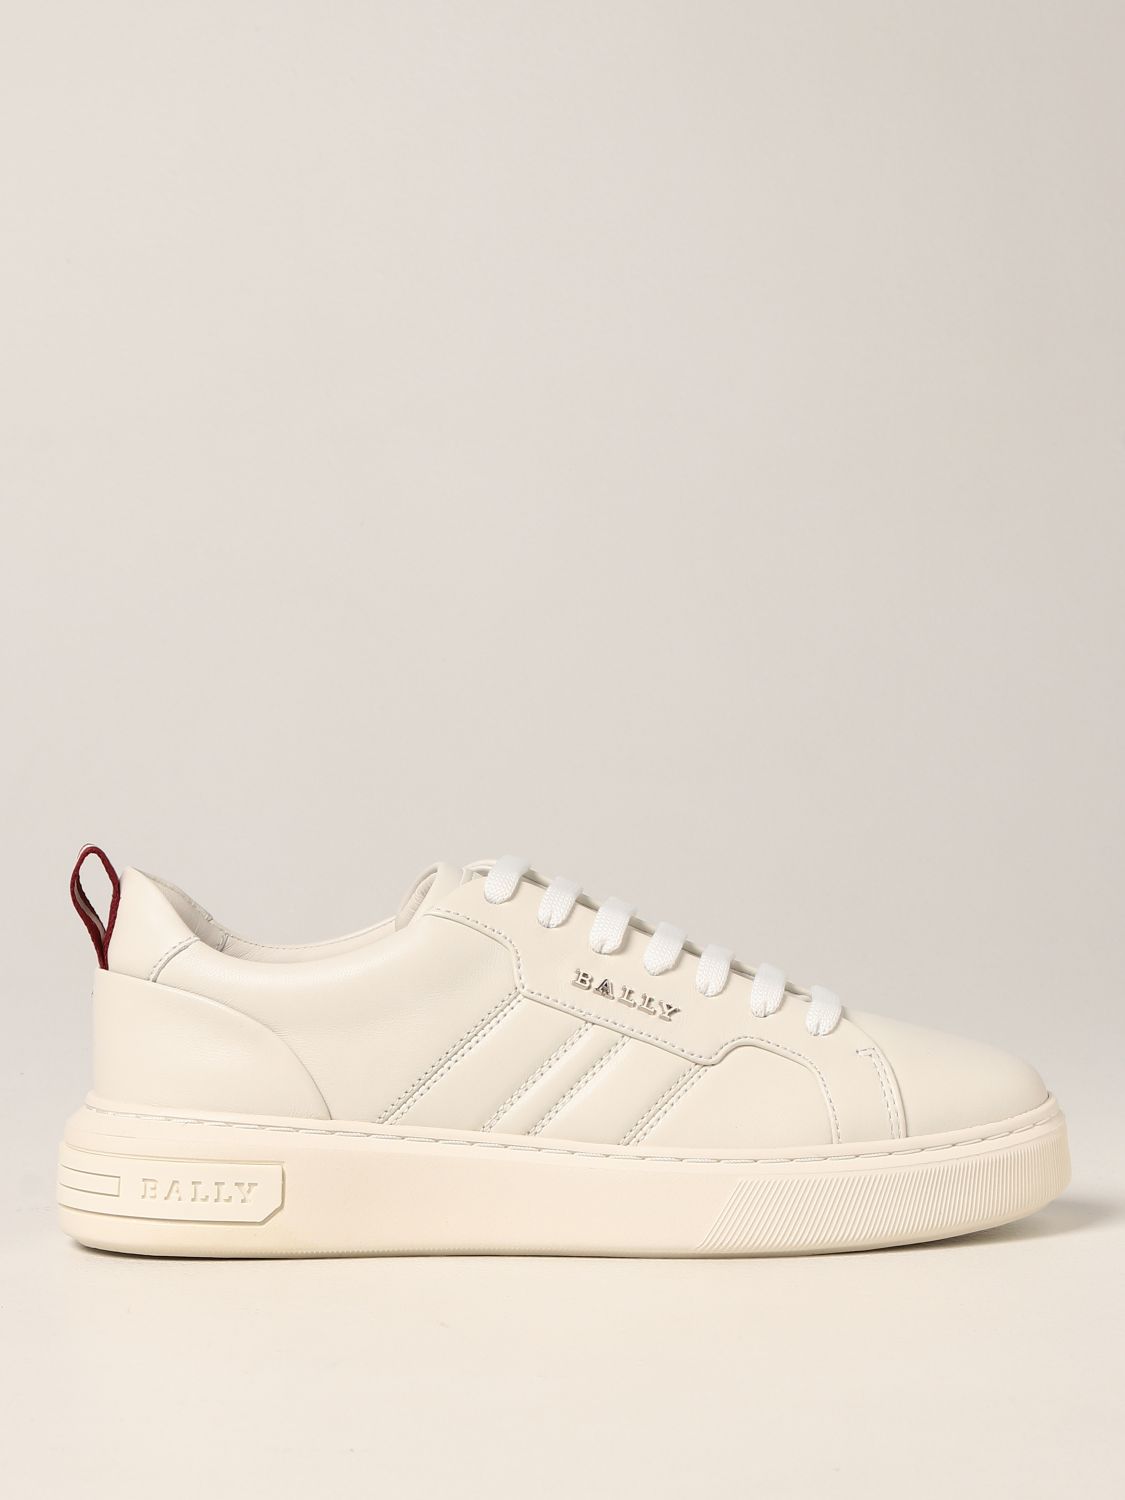 BALLY: Maxim leather sneakers with logo - White | Bally sneakers NEW ...